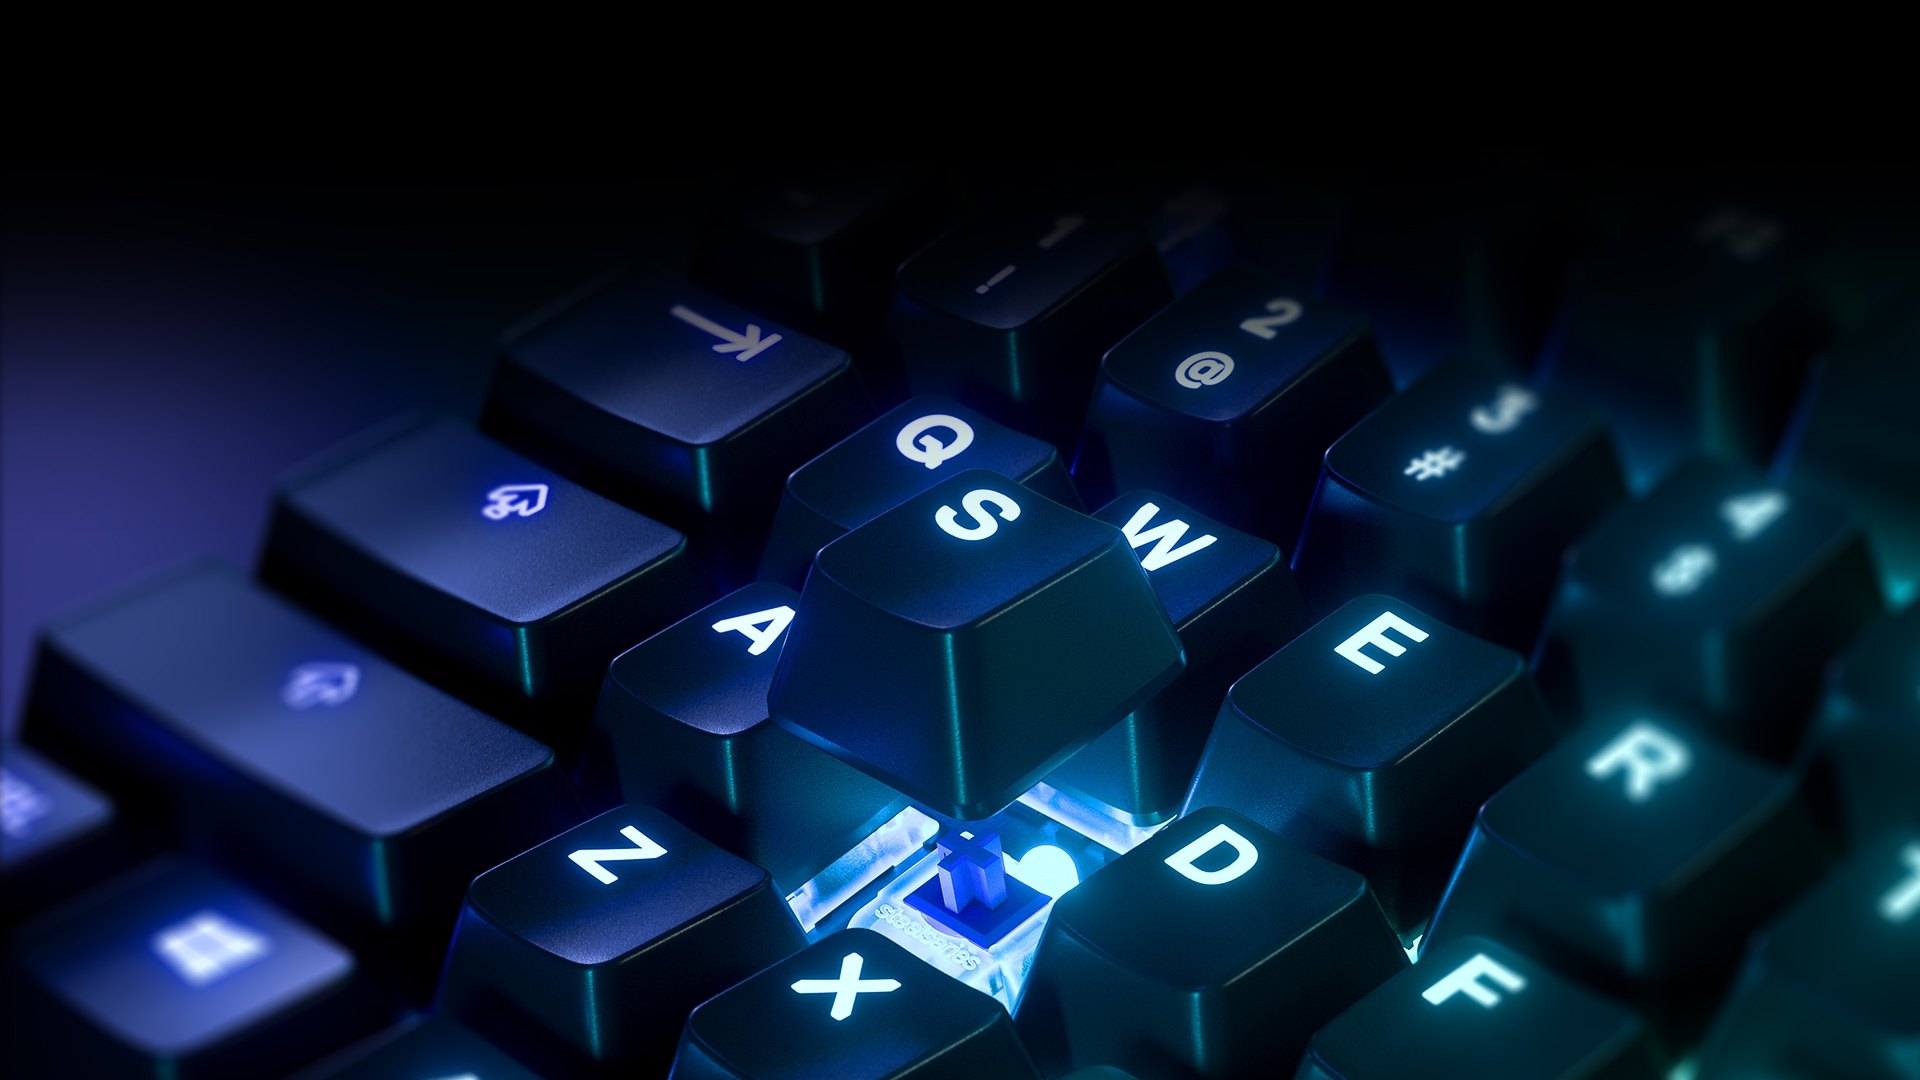 Top 3 Computer Keyboards for Home, Office & Gaming in 2022